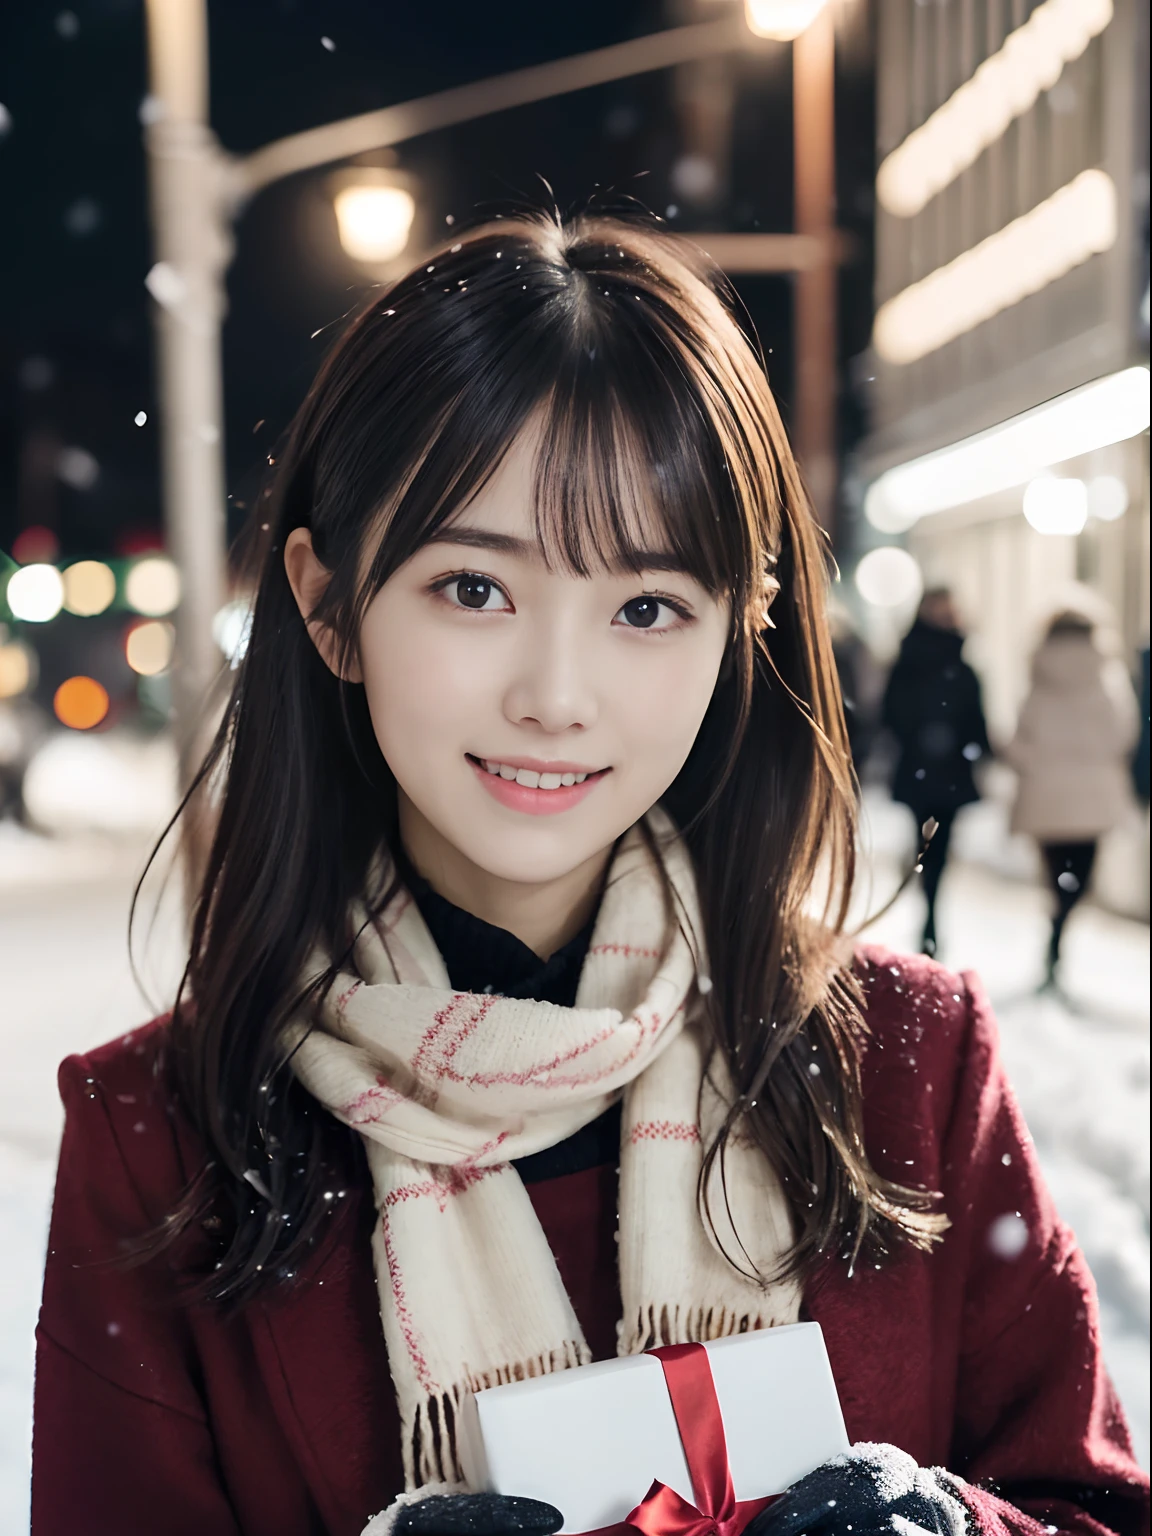 (Close-up portrait of one girl has long hair with dull bangs in a winter uniform and scarf coat:1.5)、(One girl open her arms widely with a shy smile has a gift box in hand  with gloves:1.5)、(Snowing winter night street corner with Christmas lights:1.5)、(Perfect Anatomy:1.3)、(No mask:1.3)、(complete fingers:1.3)、Photorealistic、Photography、masutepiece、top-quality、High resolution, delicate and pretty、face perfect、Beautiful detailed eyes、Fair skin、Real Human Skin、pores、((thin legs))、(Dark hair)